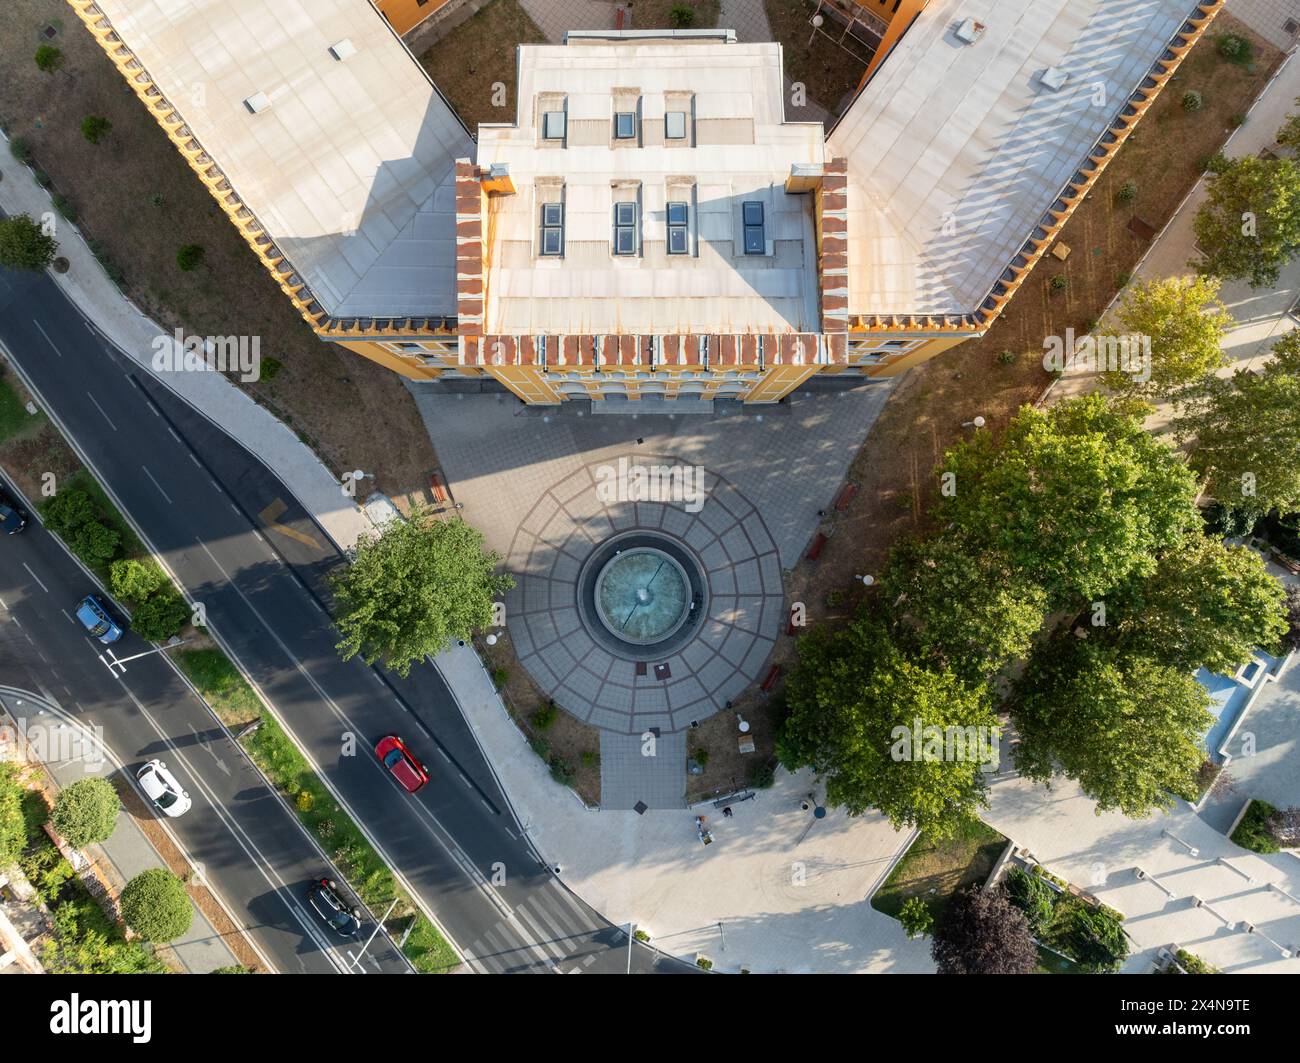 The United World College and Gymnasium building in Mostar, Bosnia and Herzegovina. Stock Photo